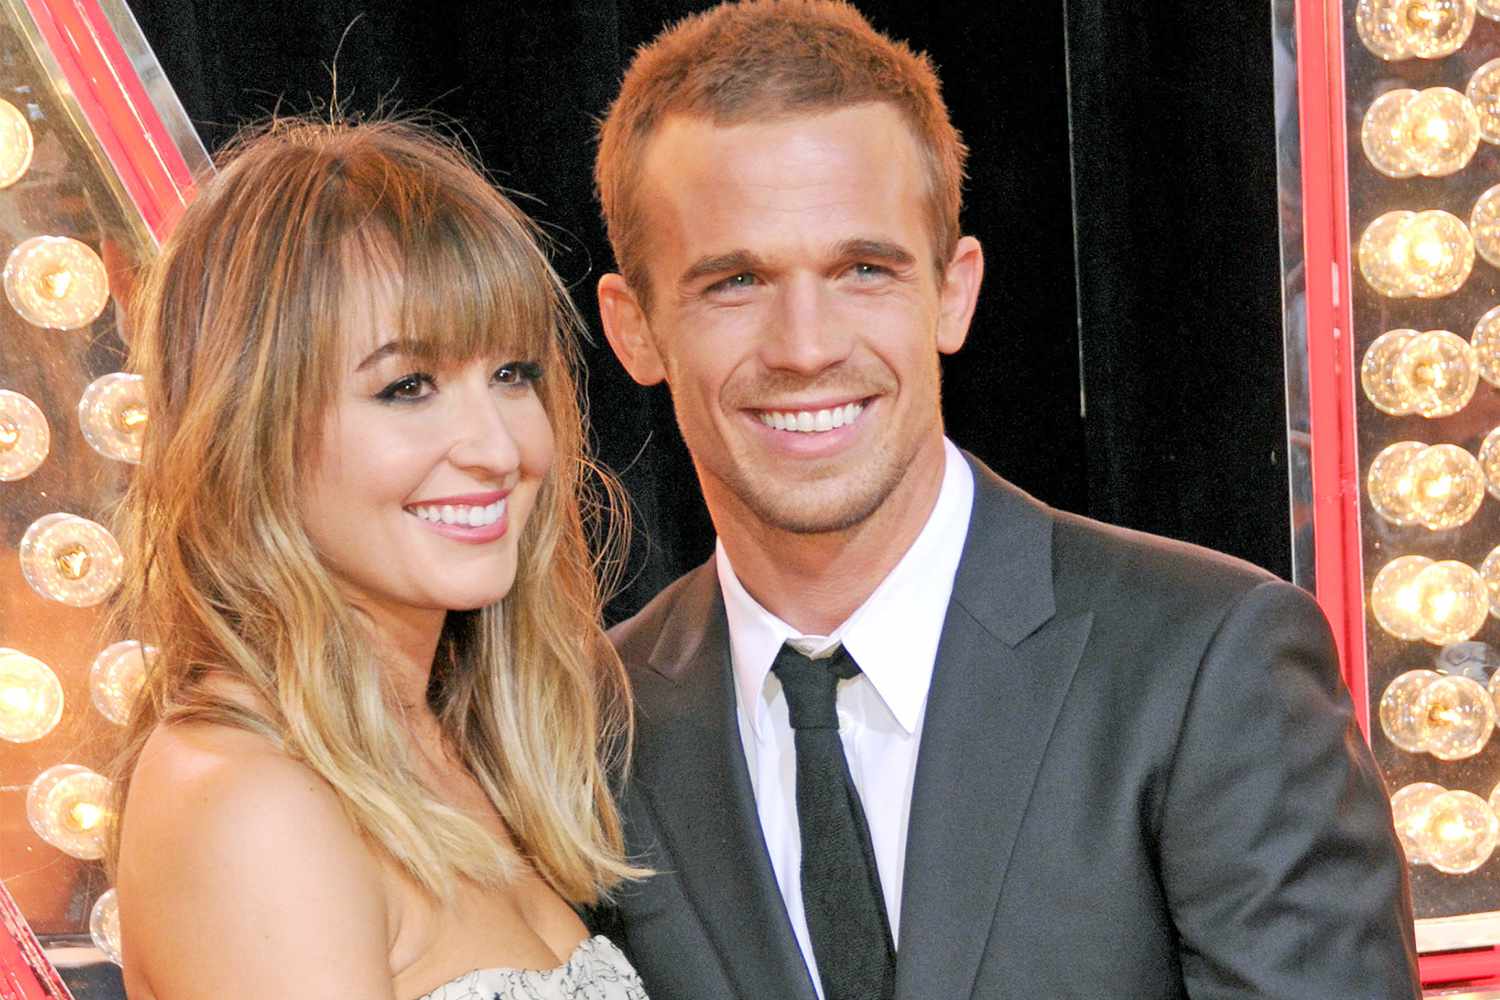 Cam Gigandet and Wife Dominique Geisendorff Divorcing After 13 Years